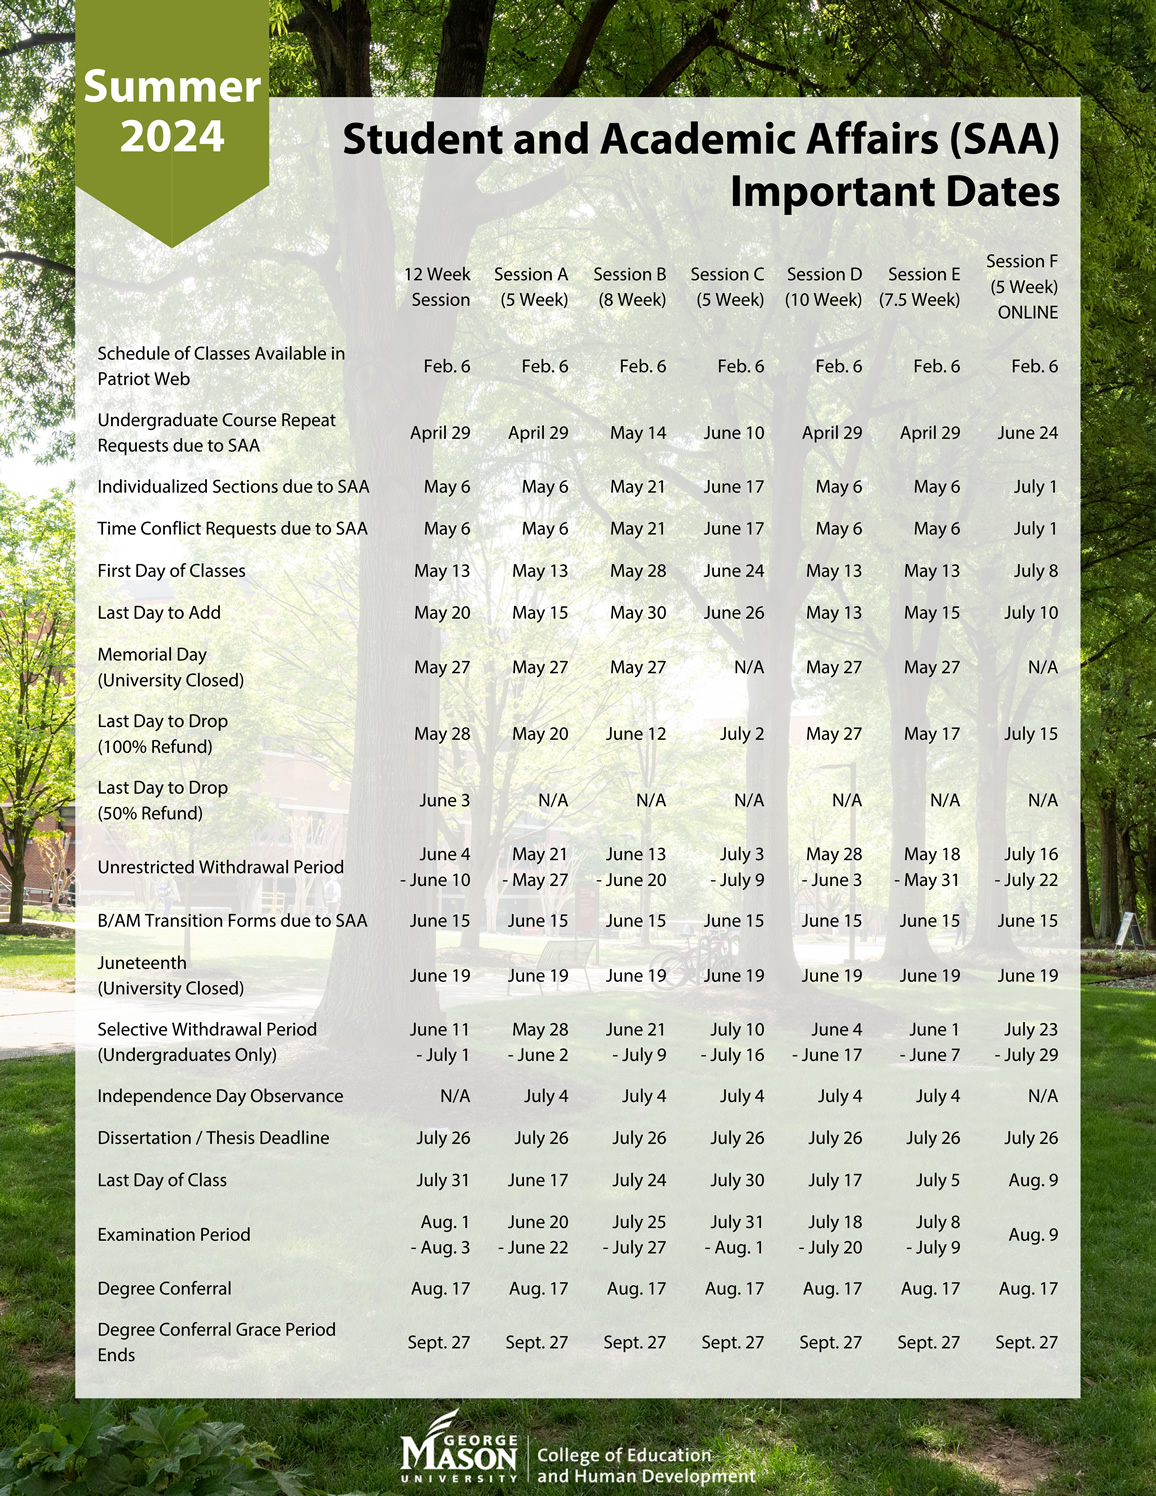 Important dates for Summer 2024 (pdf)